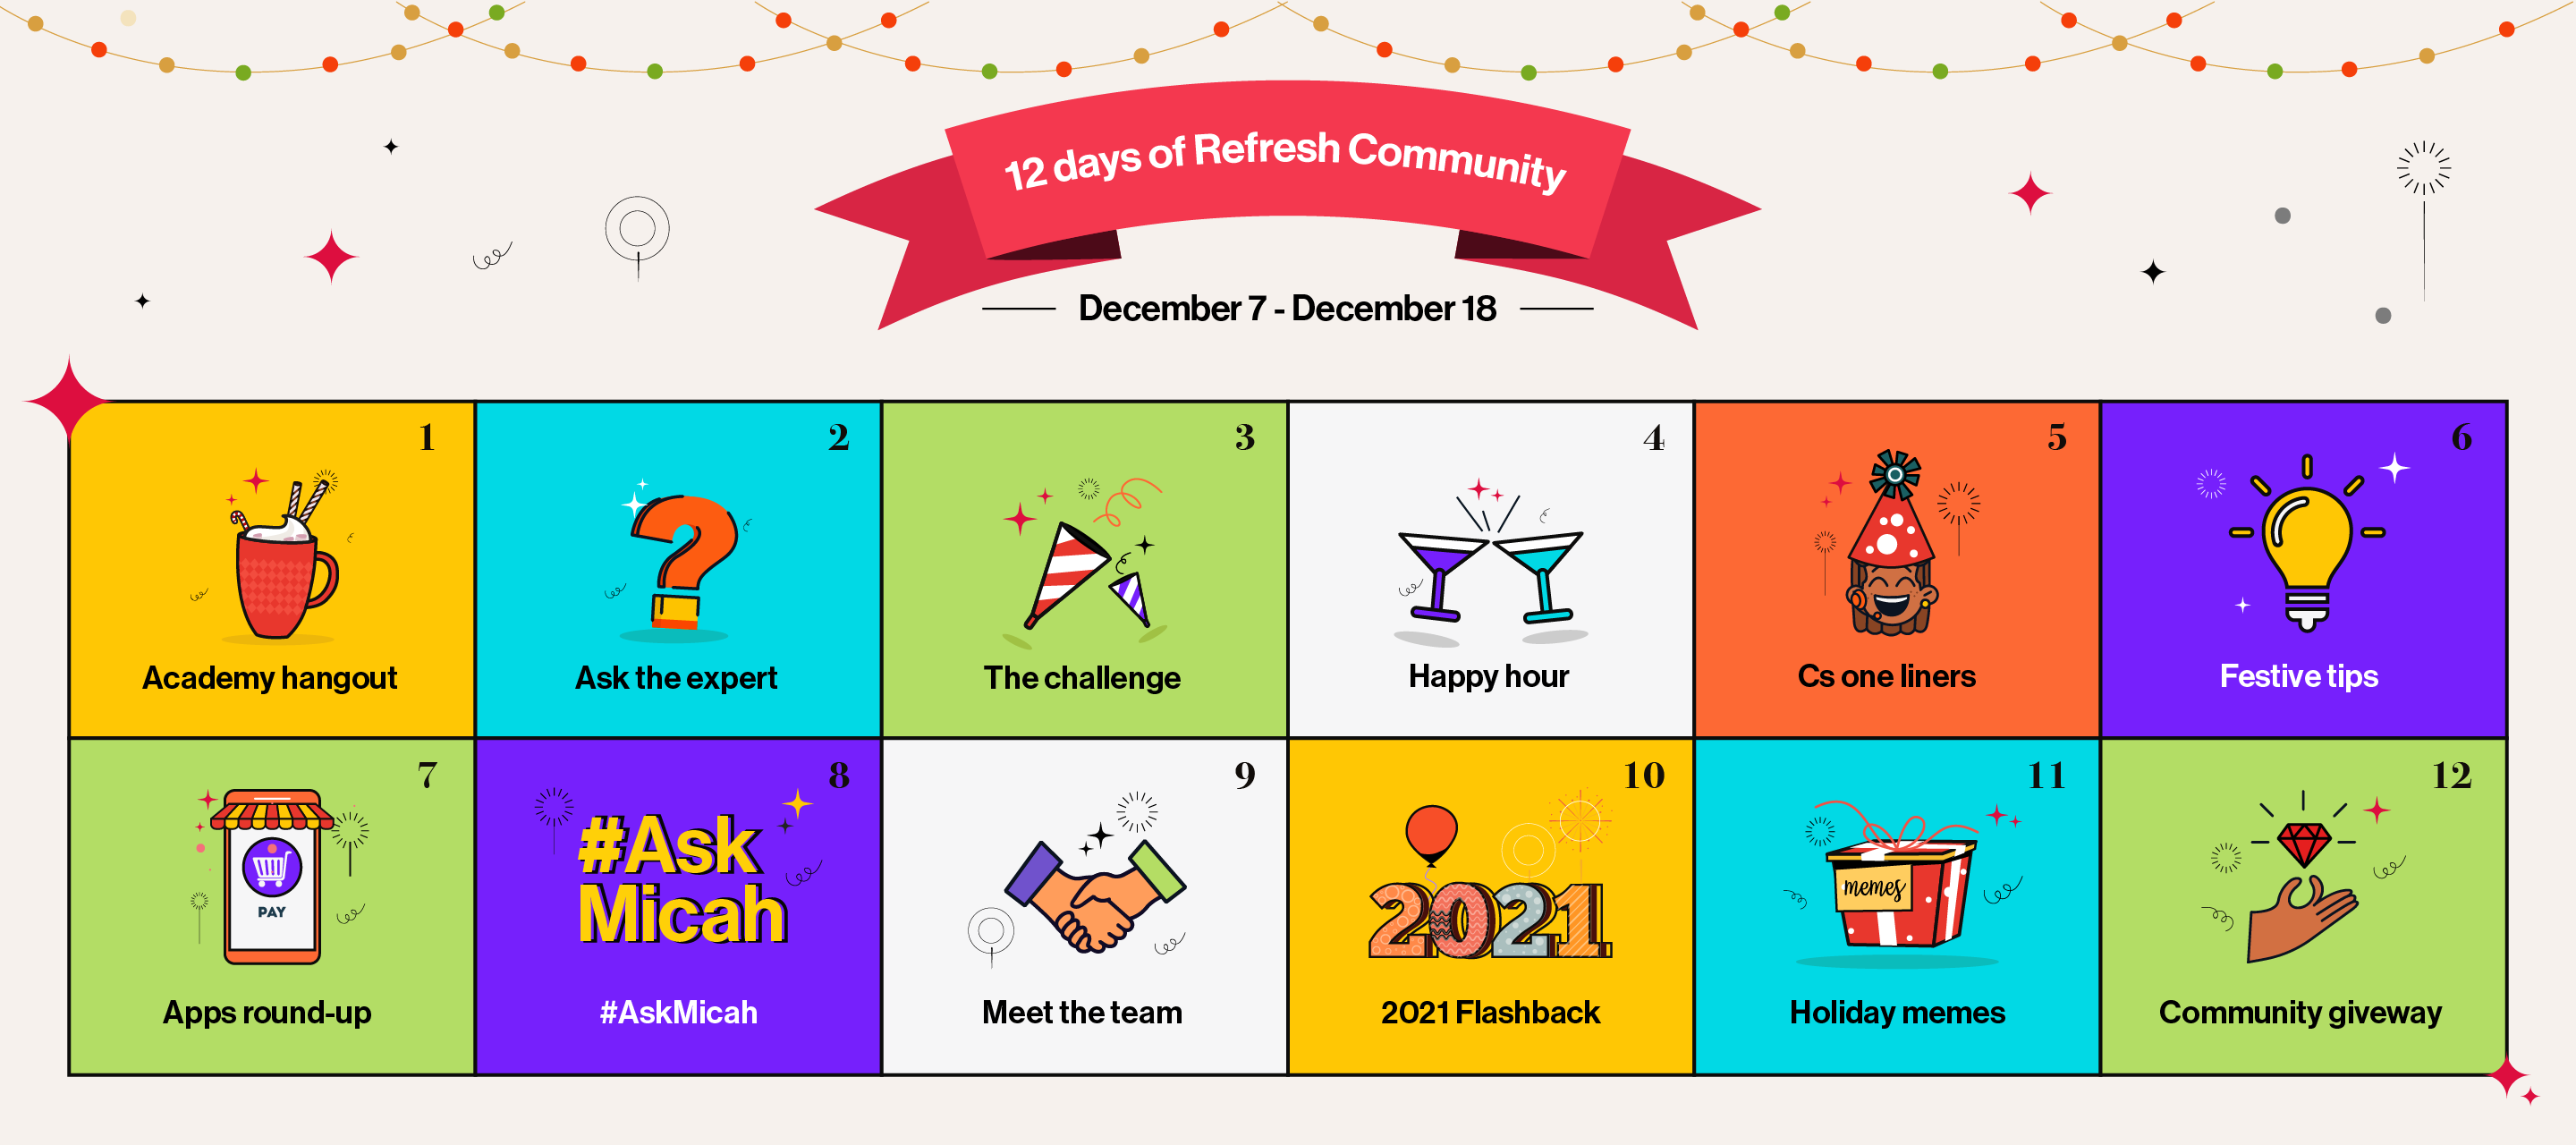 Welcome to 12 Days of Refresh Community | Virtual meetups, AMAs, giveaways and more ❄️